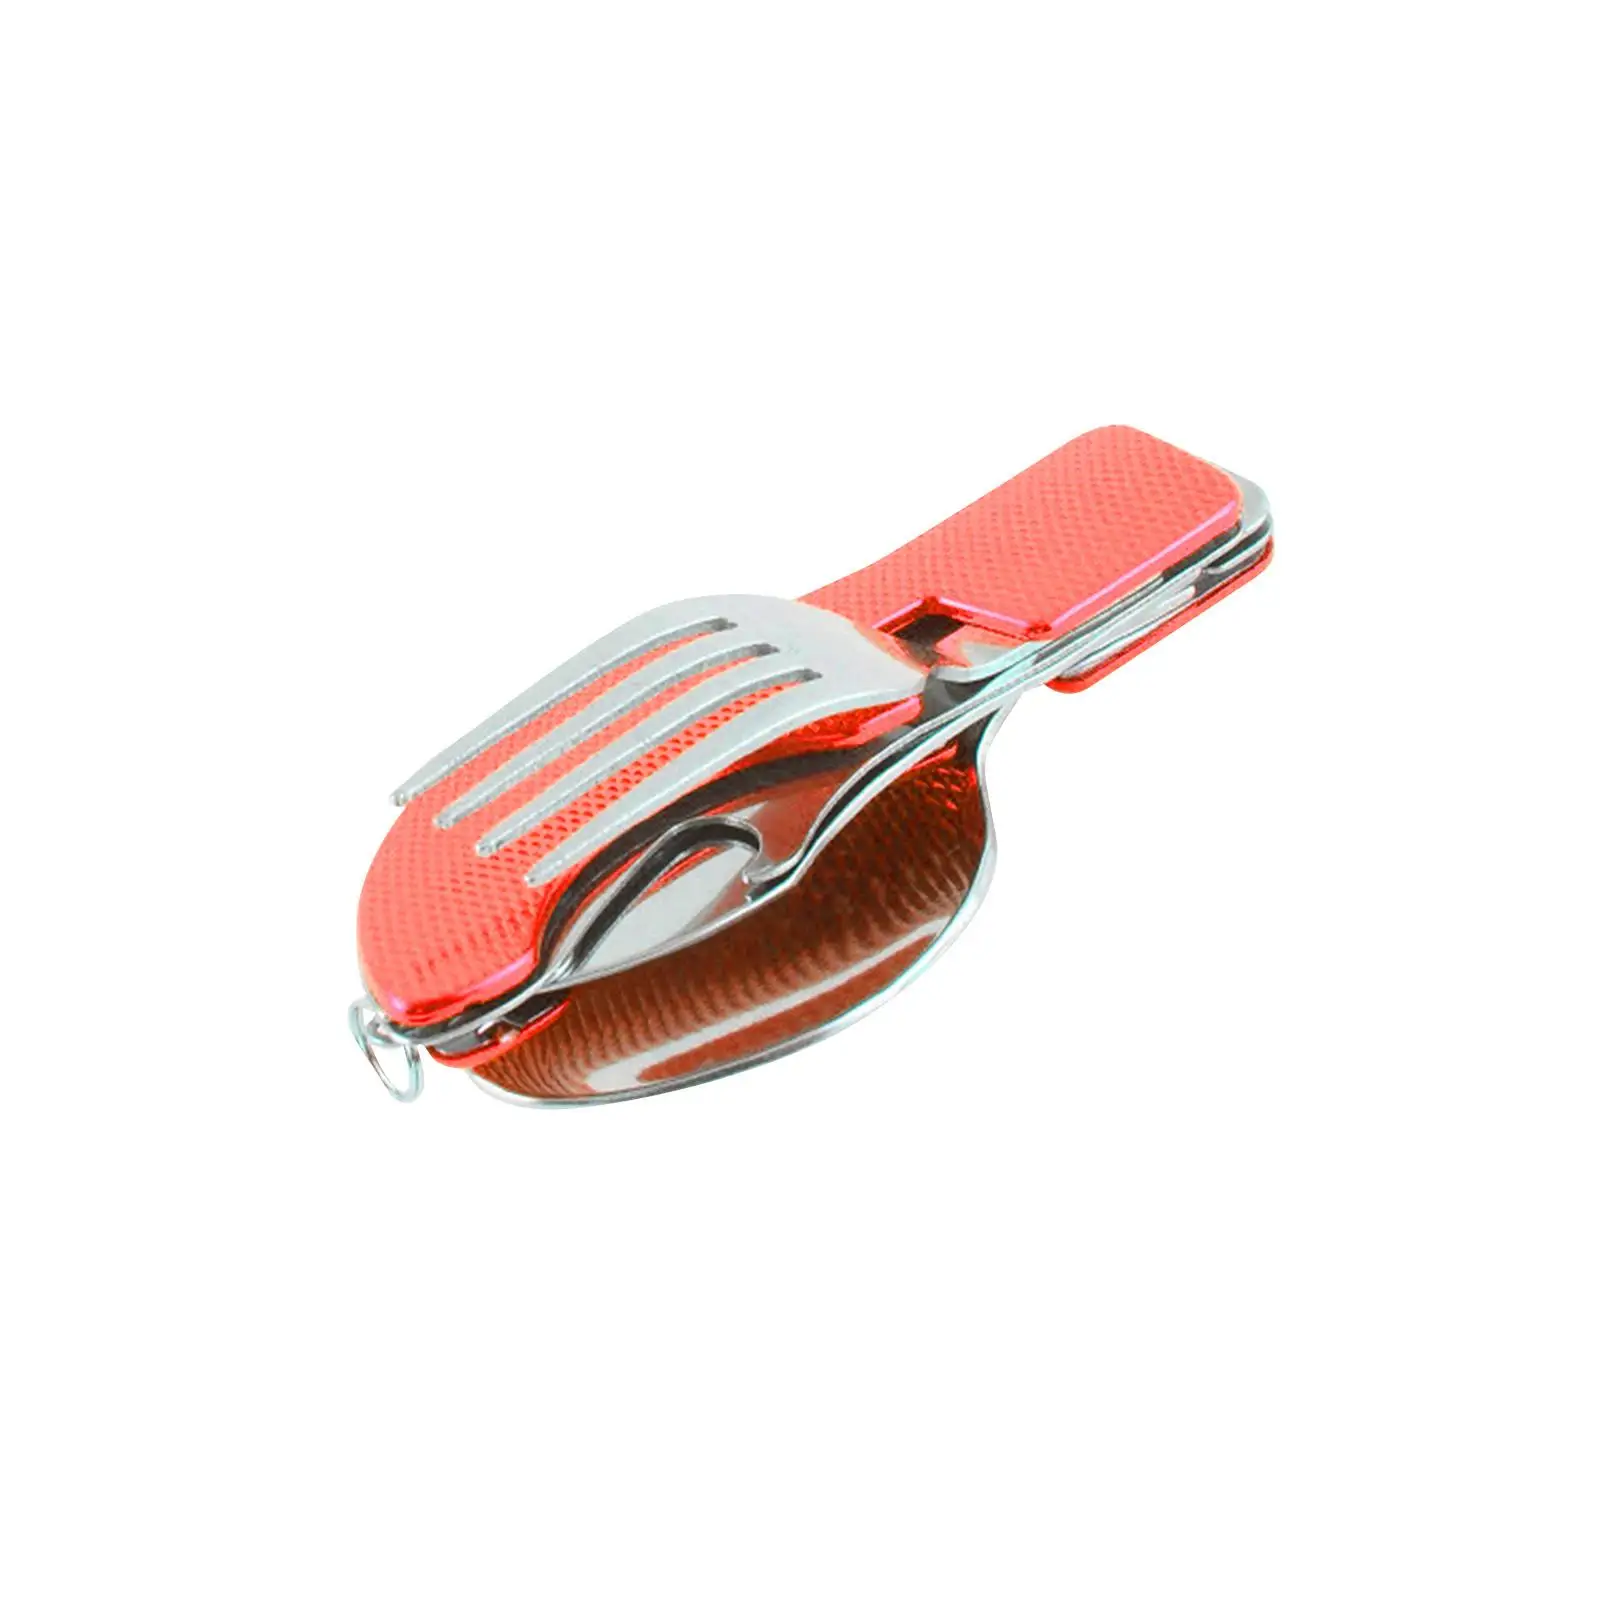 Camping Utensil Stainless Steel Spoon Fork Knife Set Folding Pocket Compact for Traveling Outdoor Barbecue Cooking Hiking